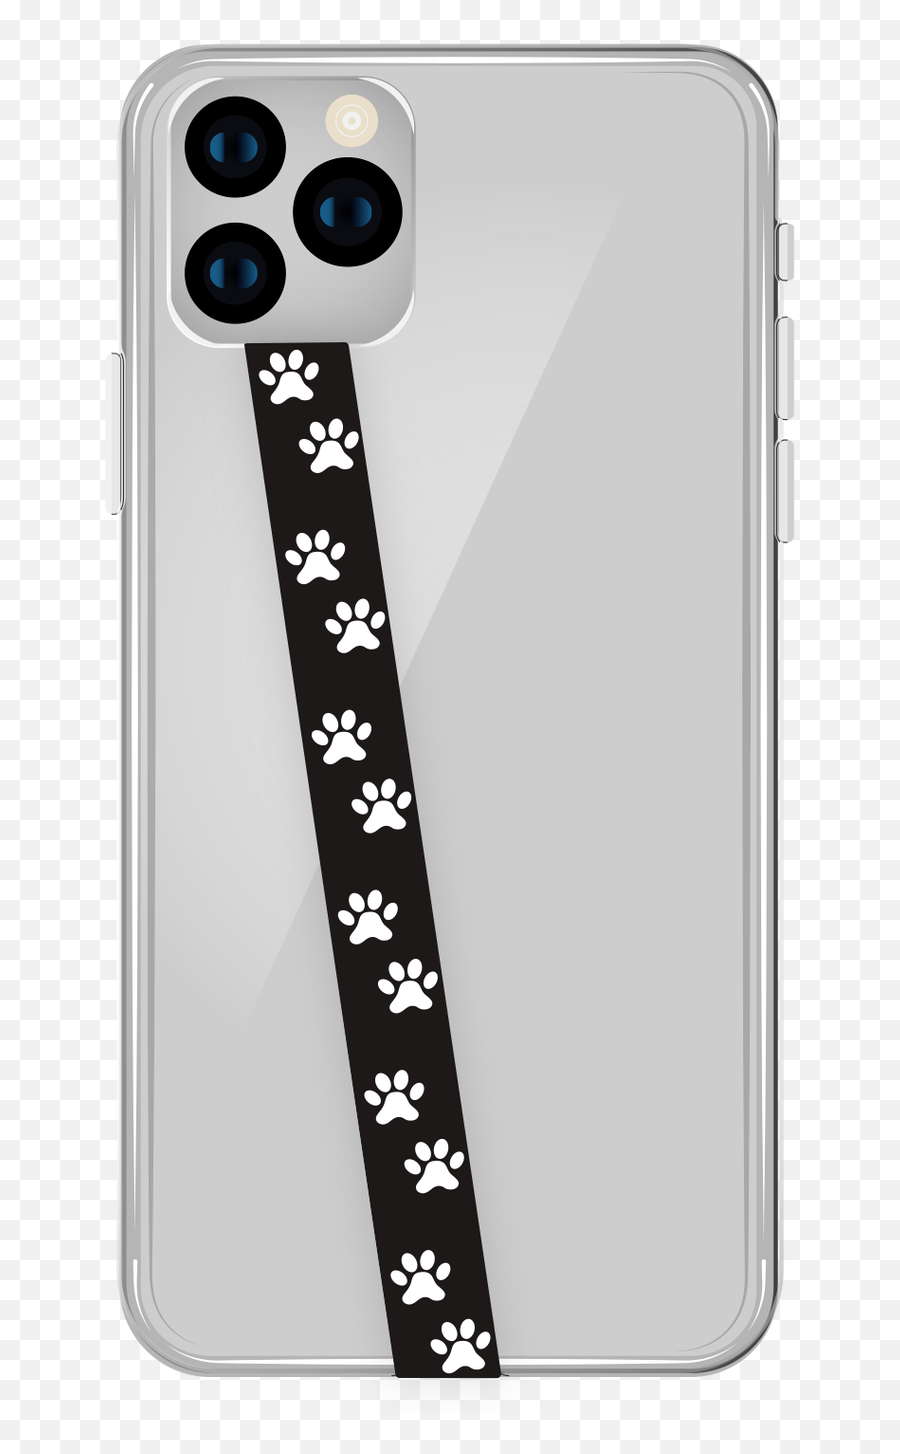 All Products U2013 Steadystraps Png Icon Skins For Iphone 6